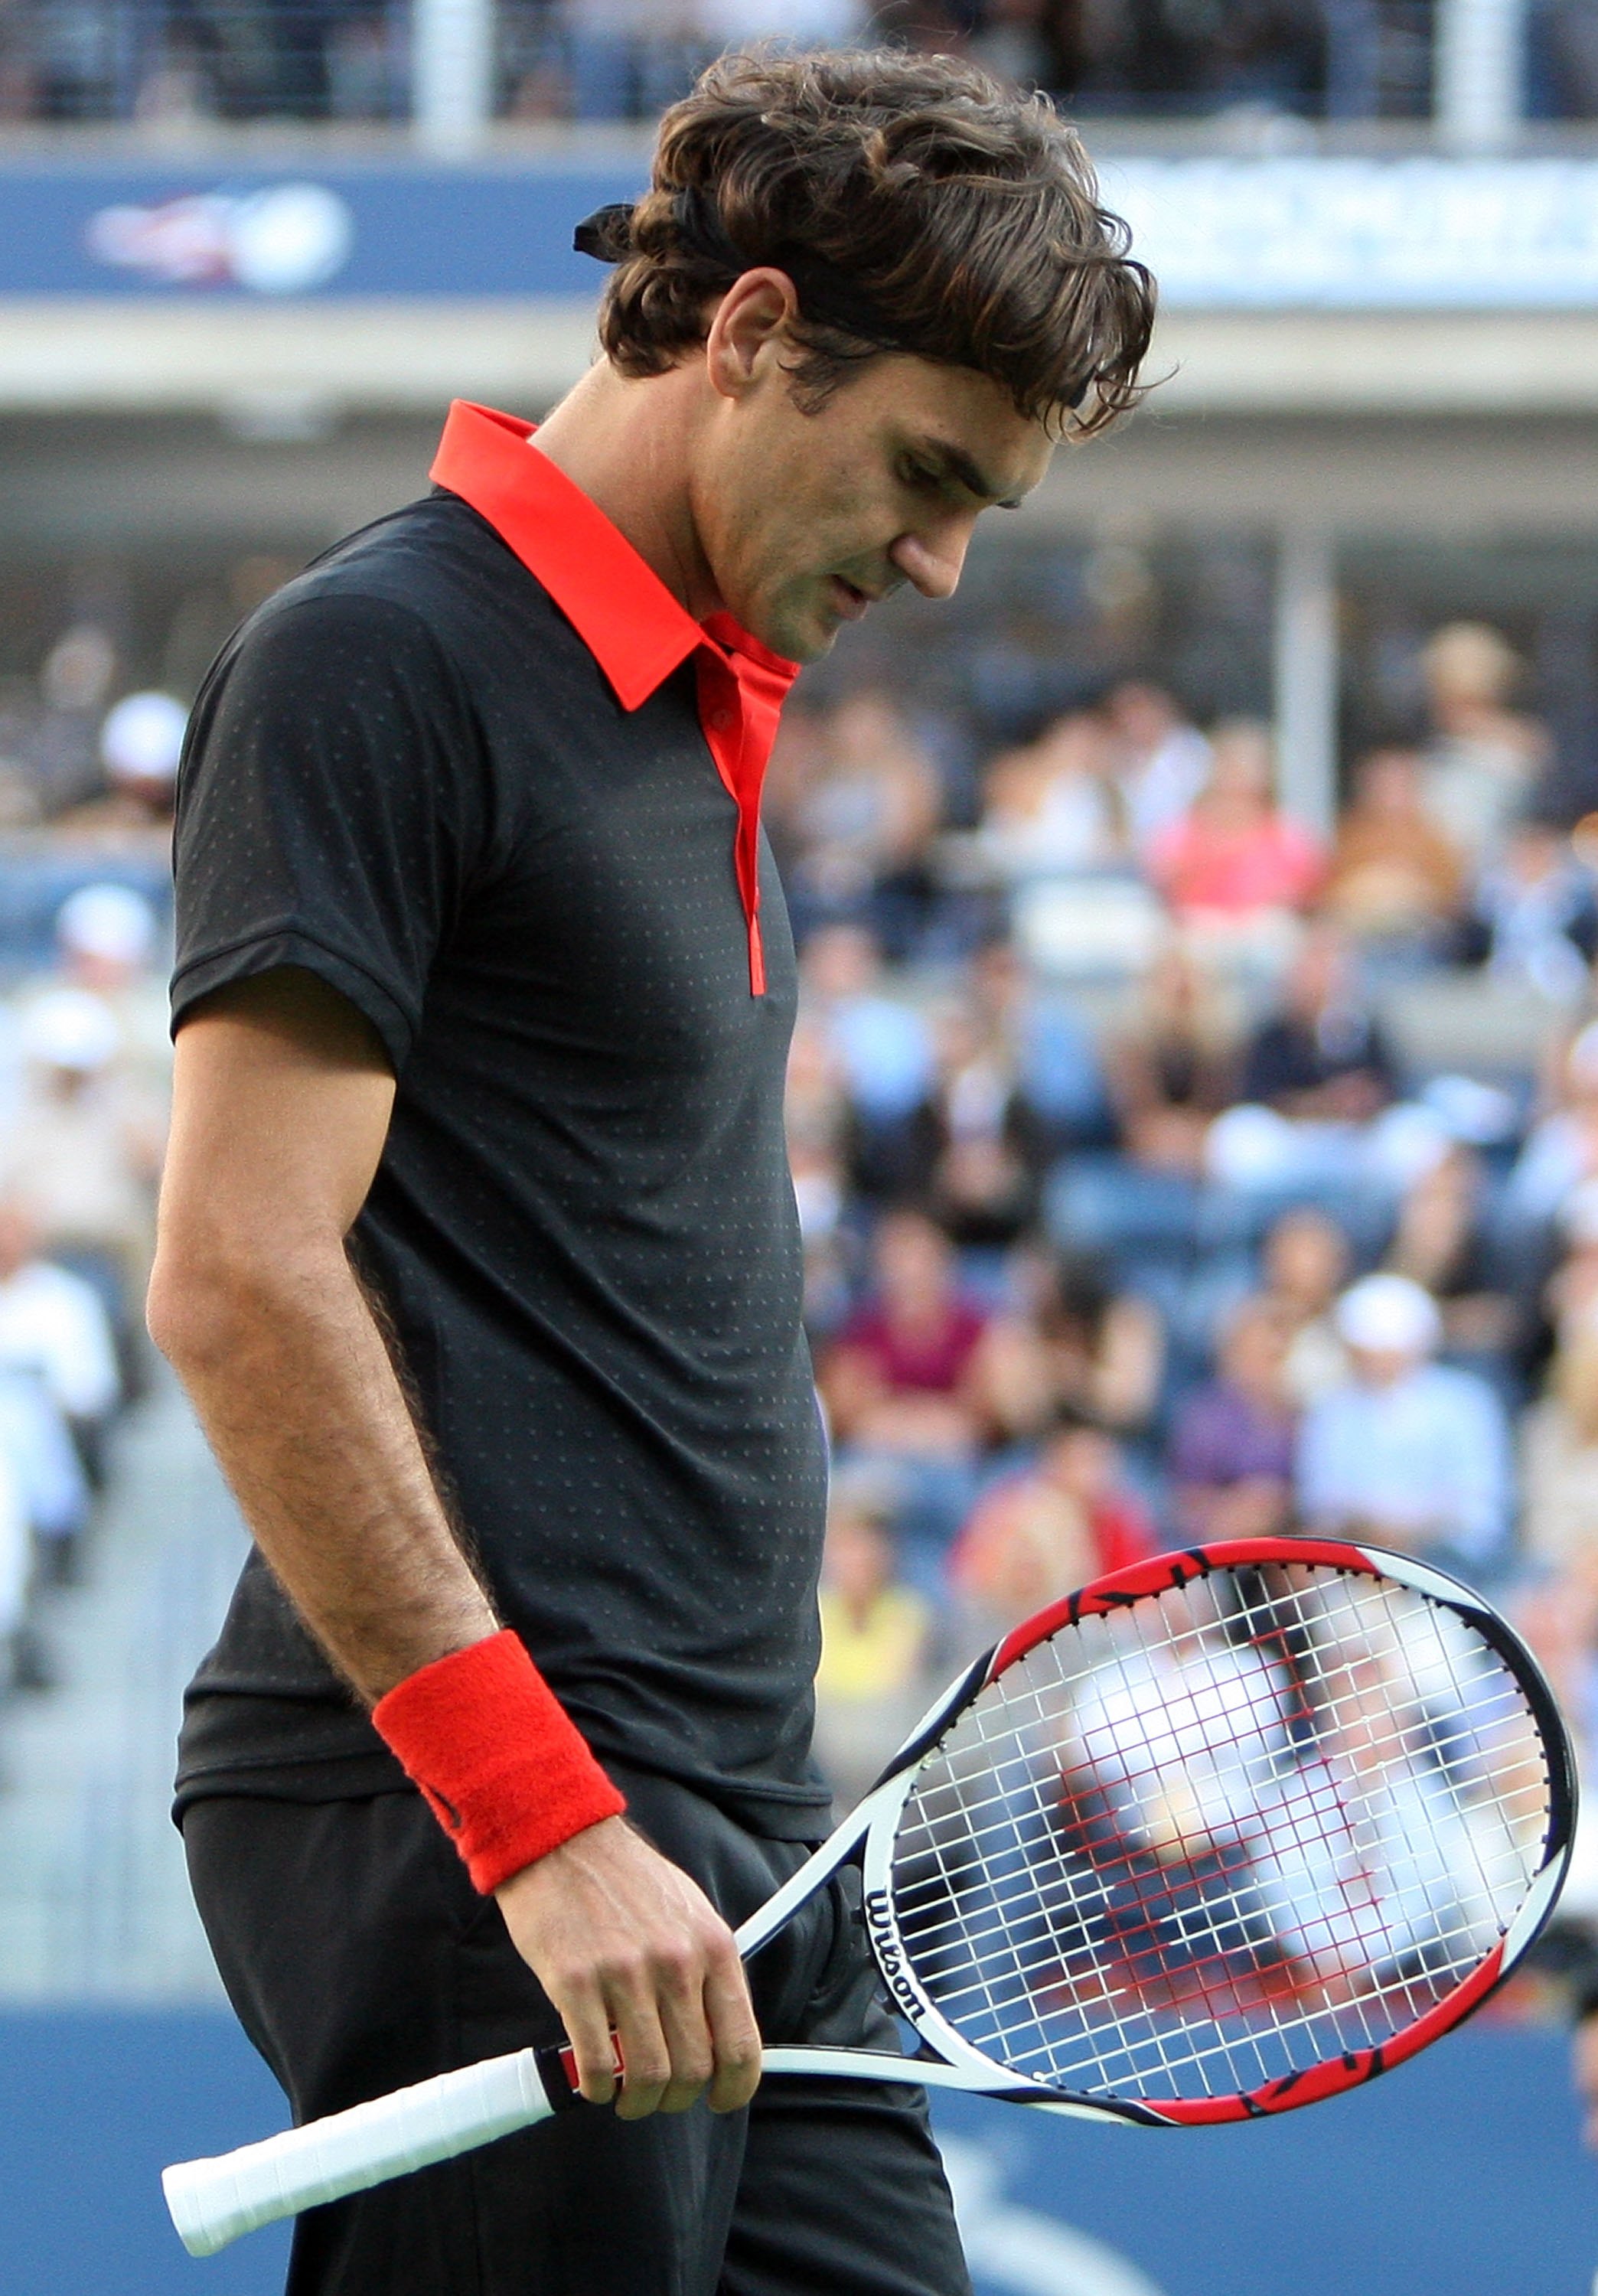 Fed fell last year, and ended his streaks at Flushing.